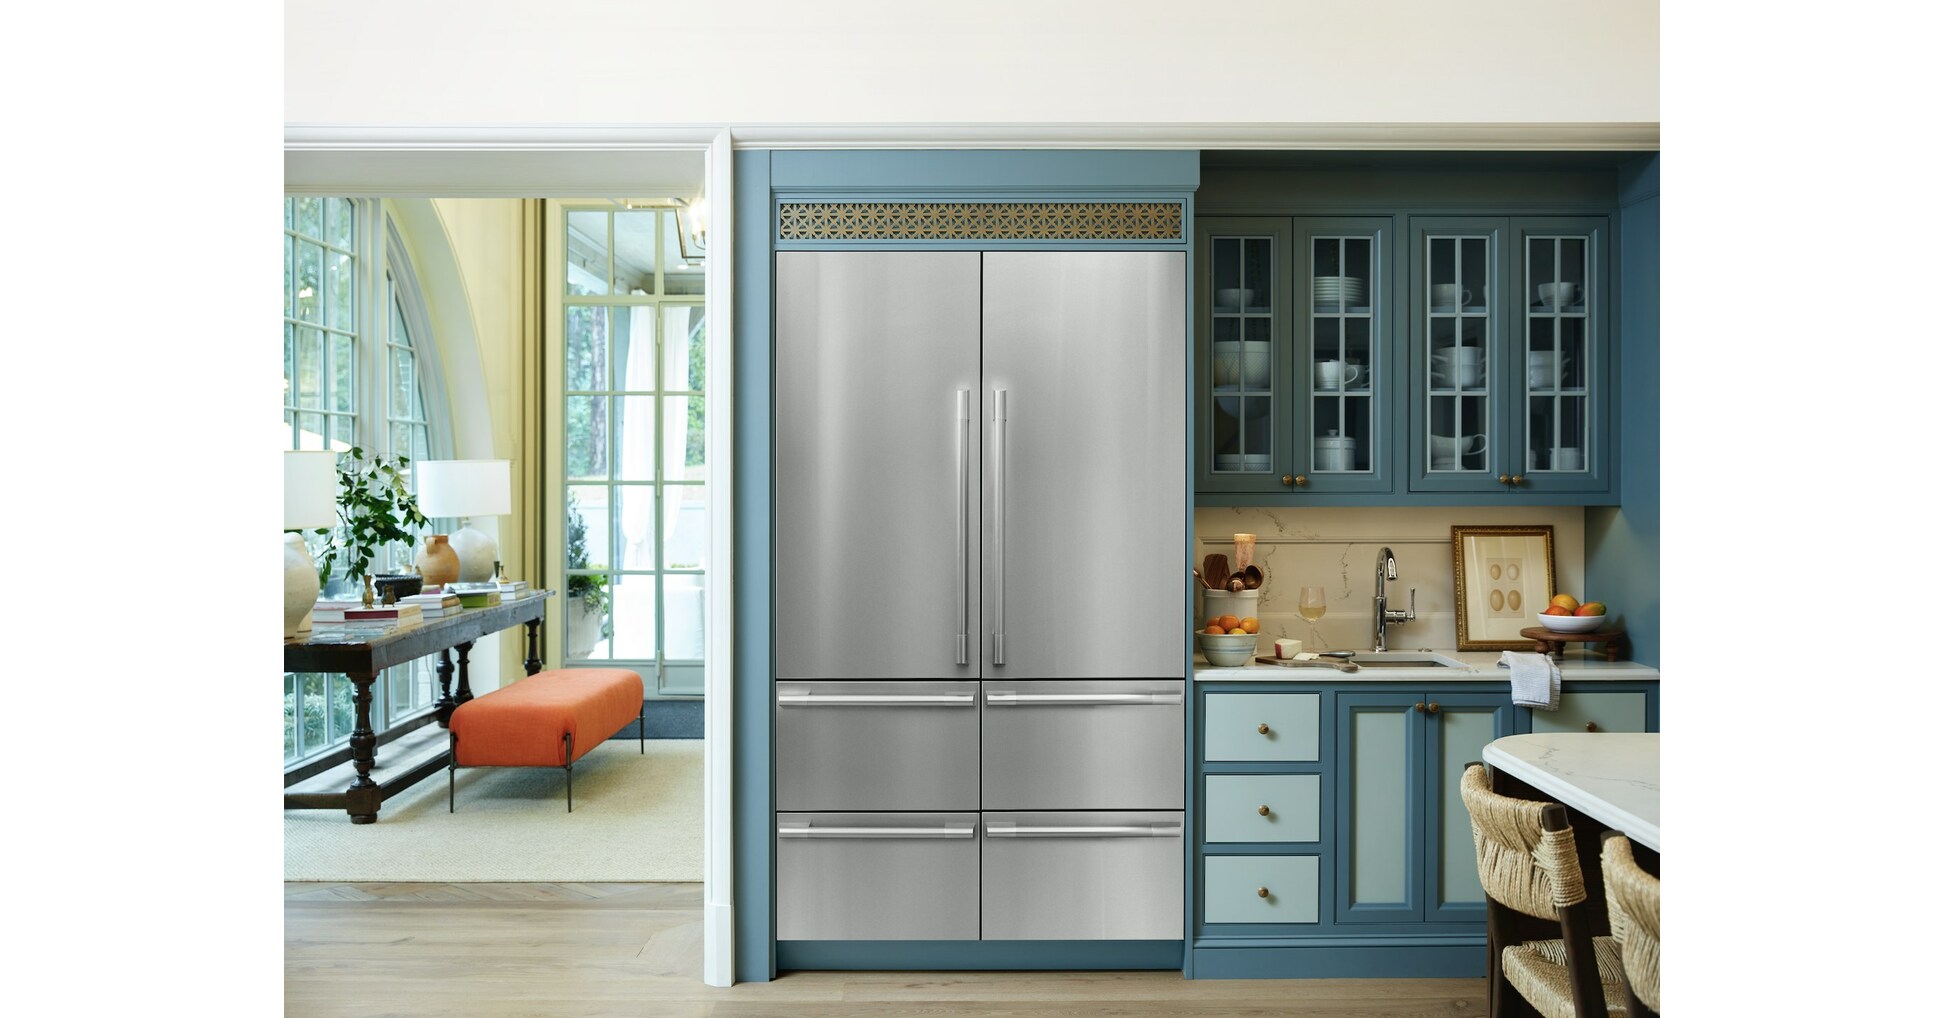 SIGNATURE KITCHEN SUITE’S 2023 LUXURY INNOVATIONS DRIVE PERFORMANCE, DESIGN AND PRECISION